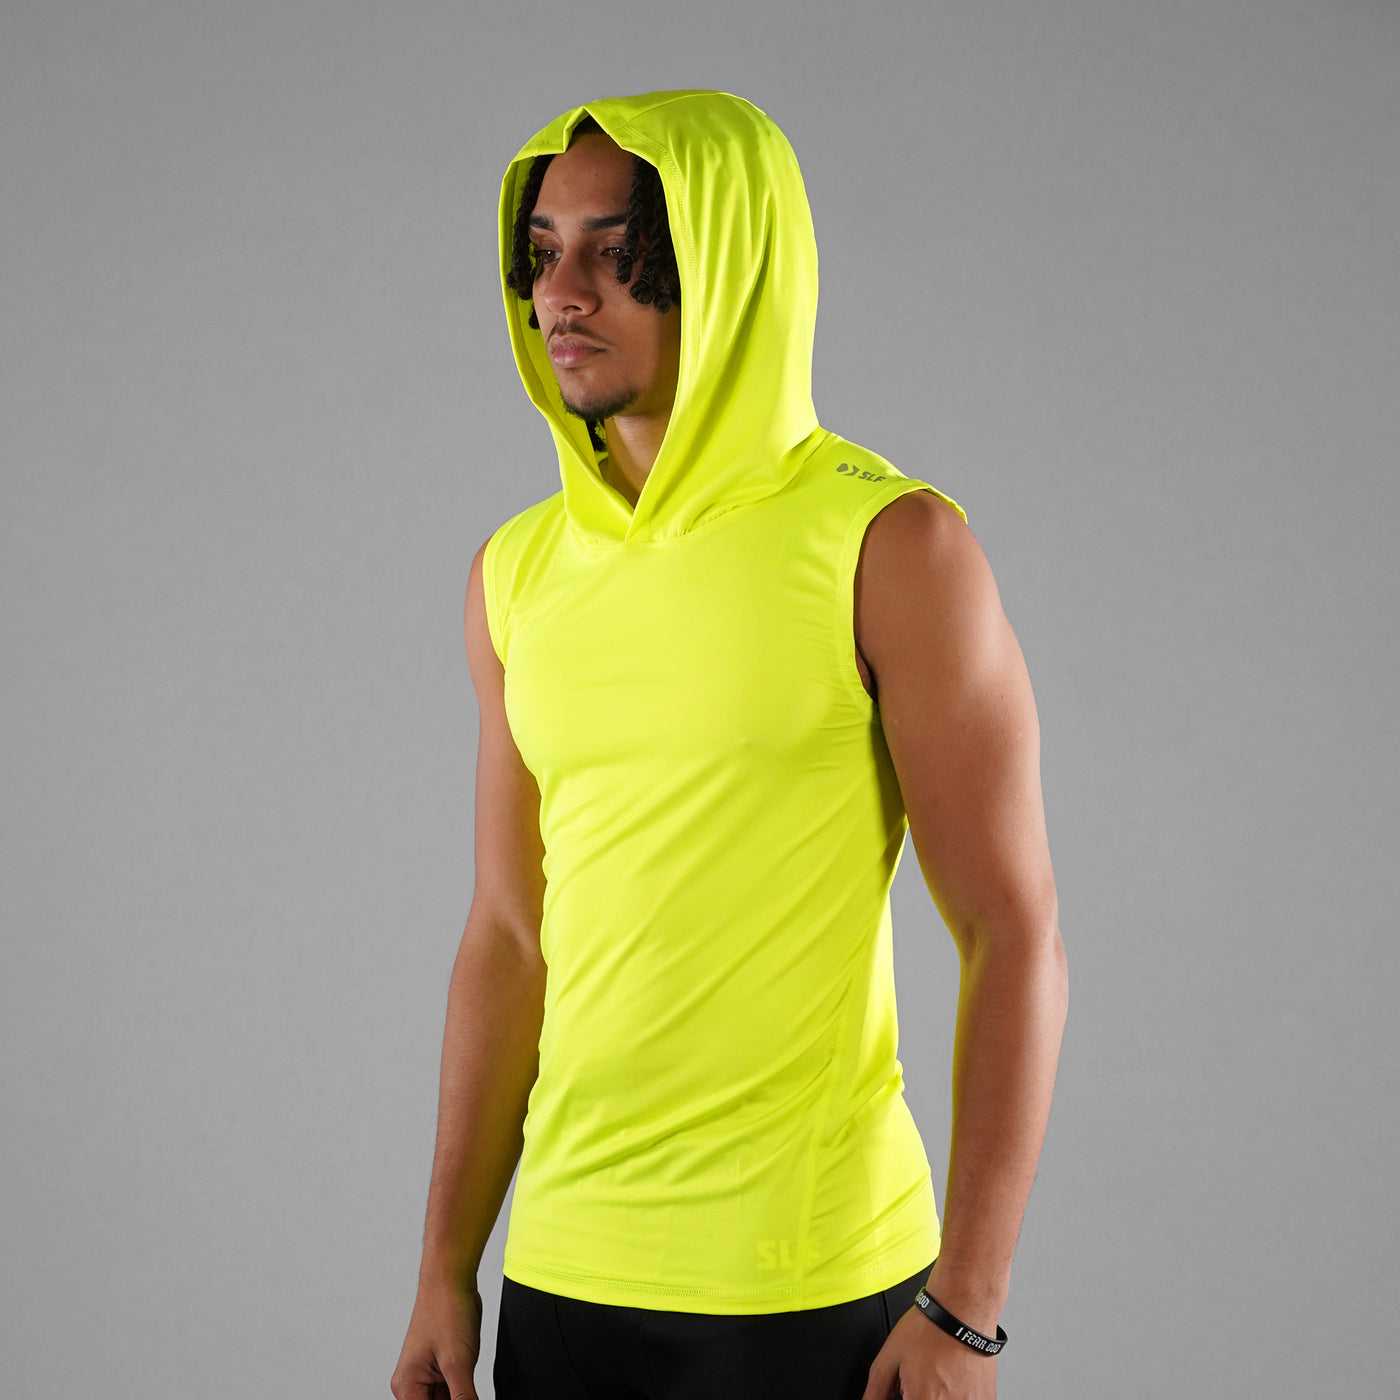 Safety Yellow Sleeveless Compression Hoodie